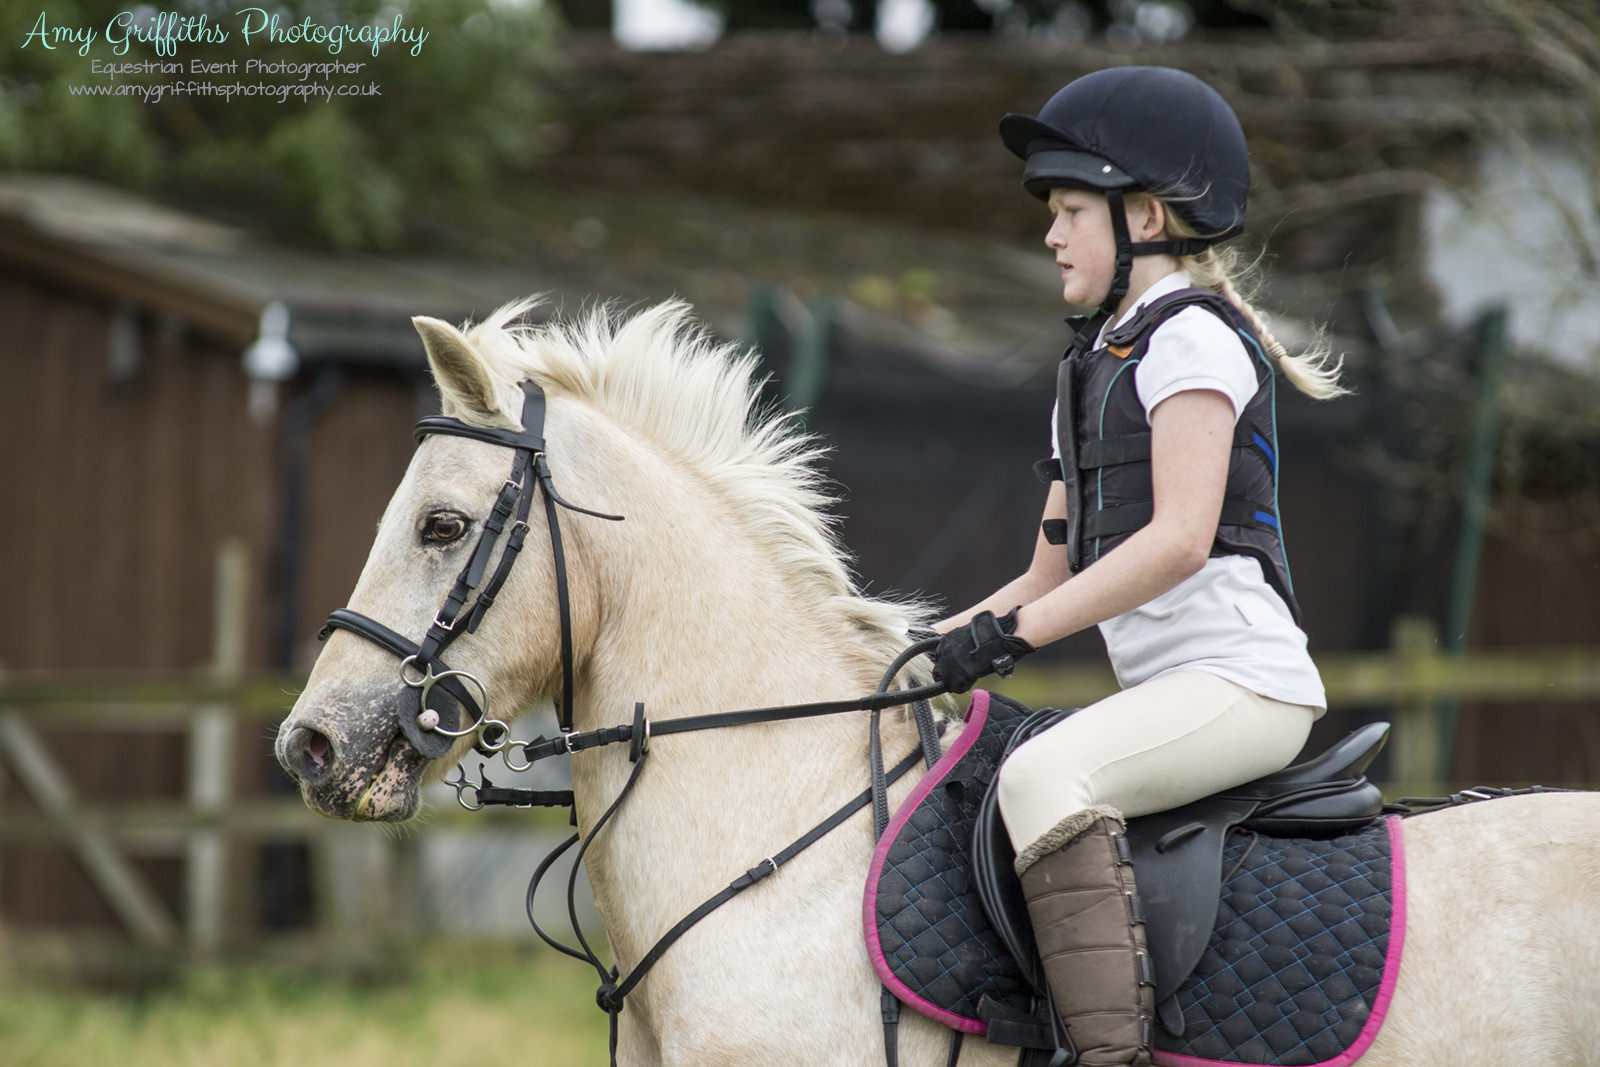 Showjumping at Kildarra Events - Amy Griffiths Event Photography